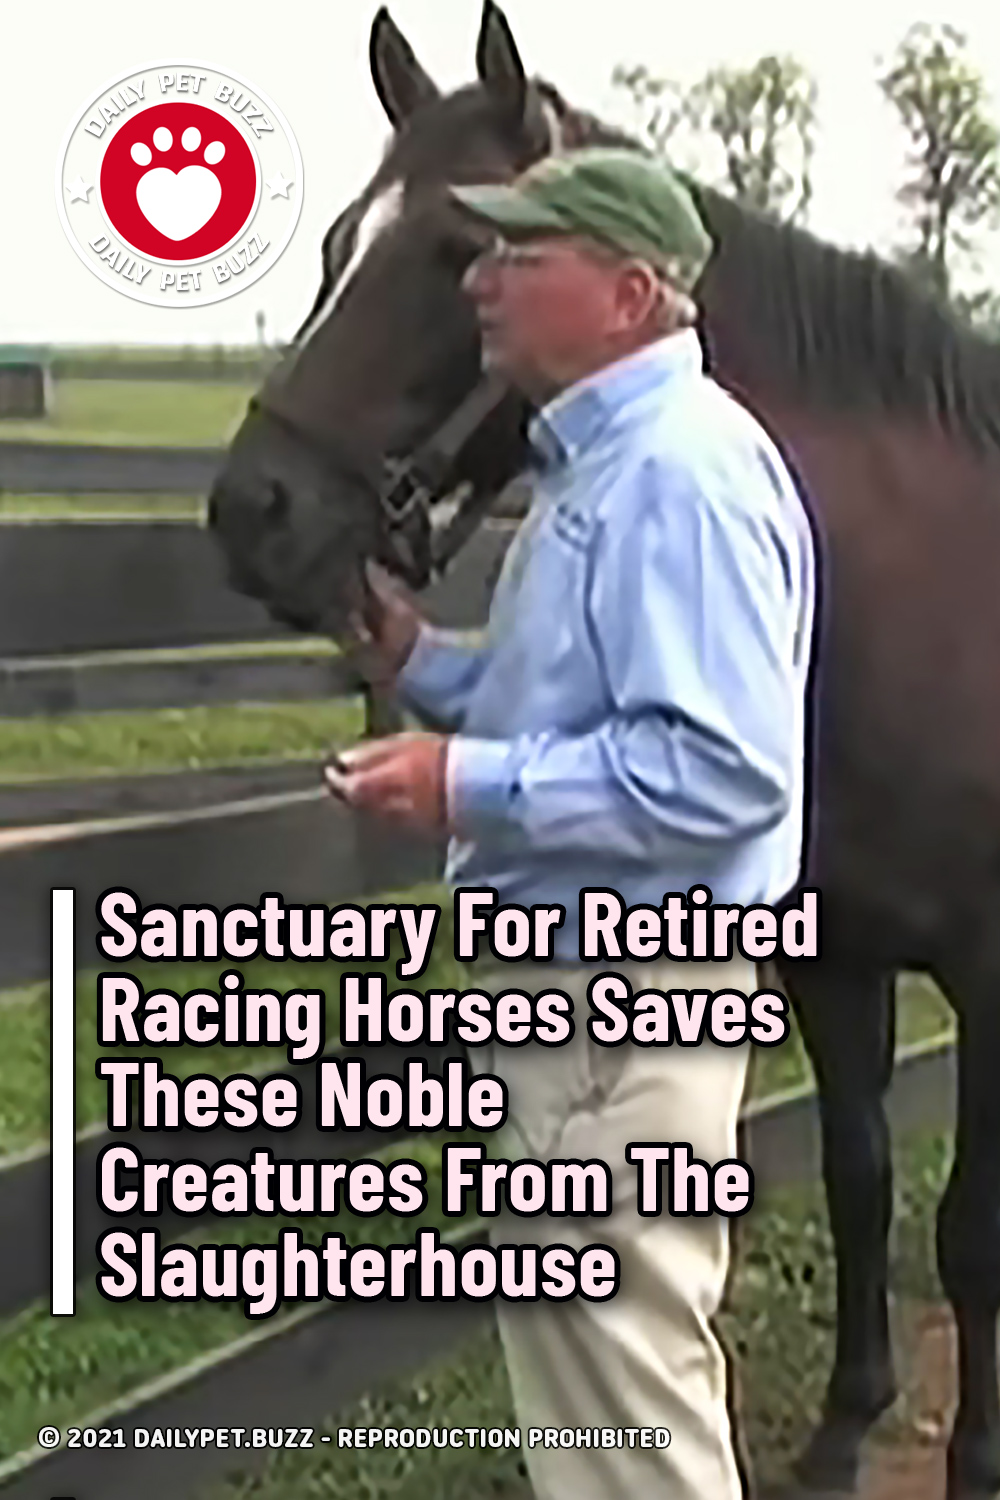 Sanctuary For Retired Racing Horses Saves These Noble Creatures From The Slaughterhouse